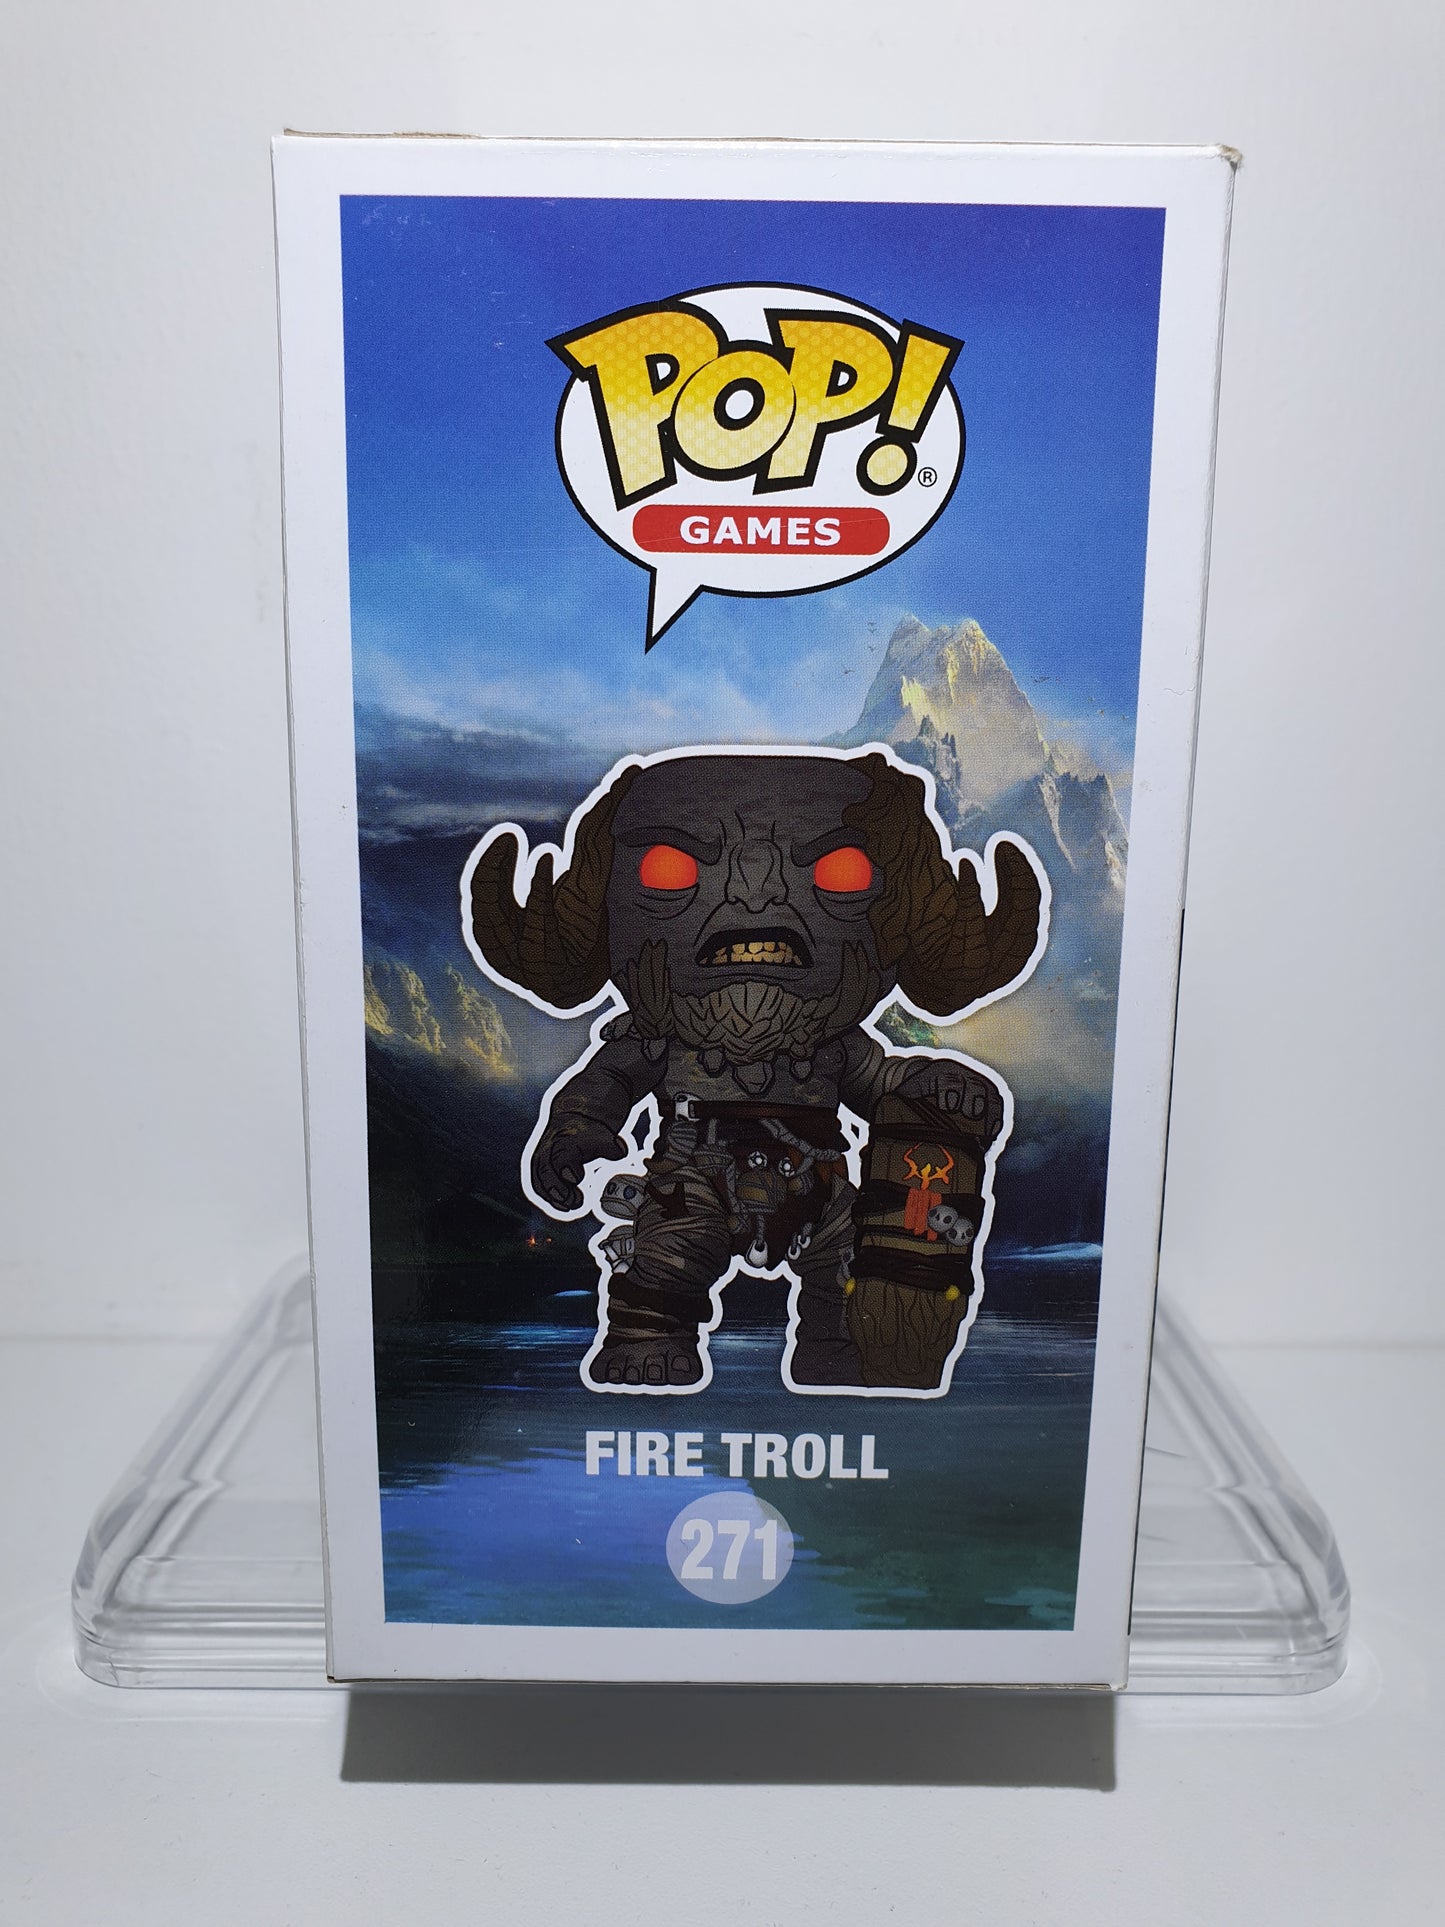 FUNKO POP 271 - GOD OF WAR - FIRE TROLL - OFFICIAL LICENSED PRODUCT - OCCASION